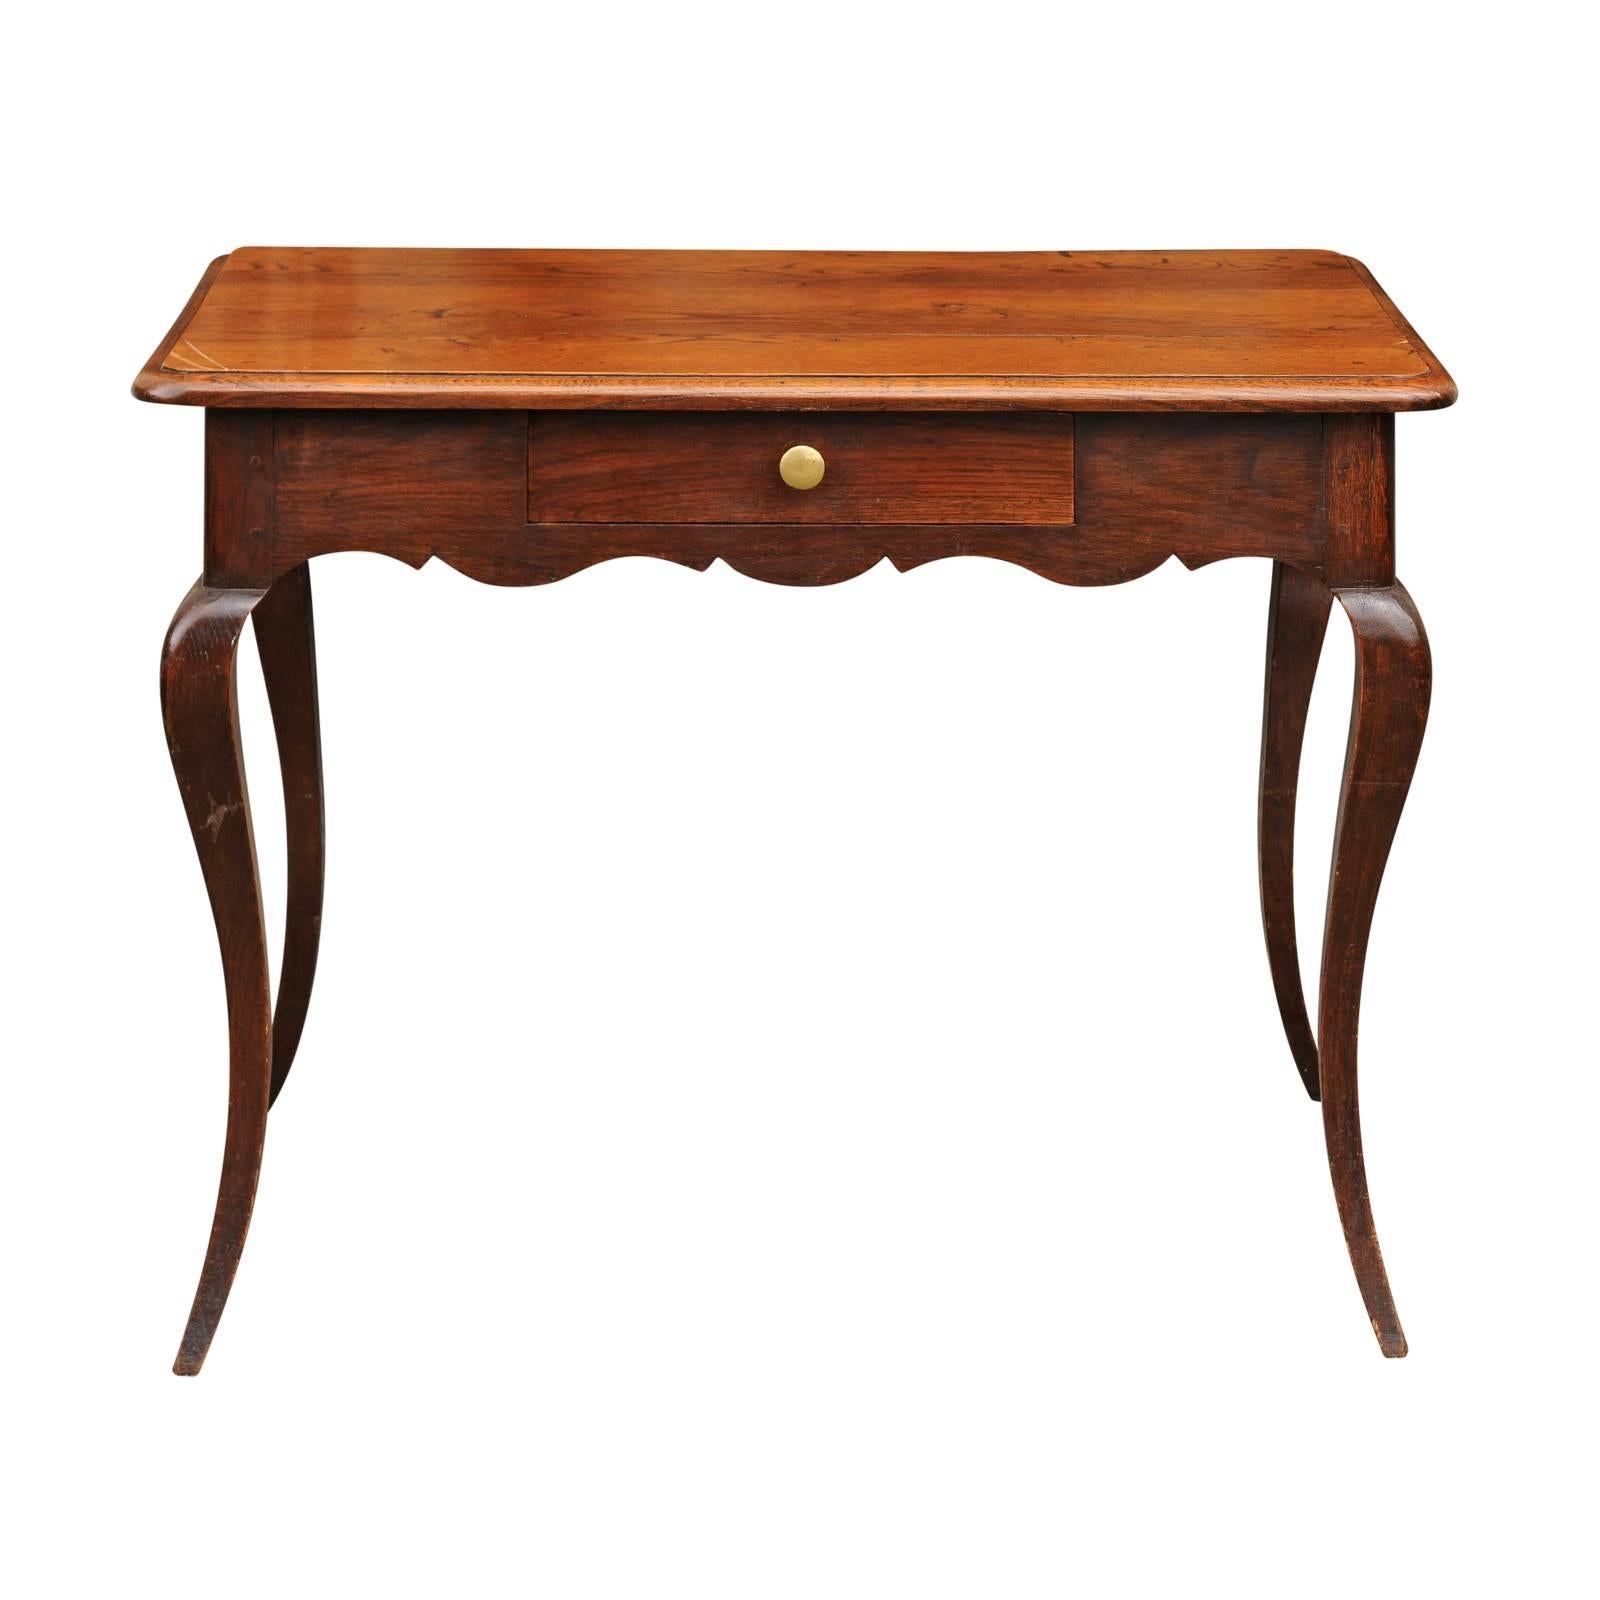 French, 1820s Louis XV Style Oak Side Table with Single Drawer and Cabriole Legs